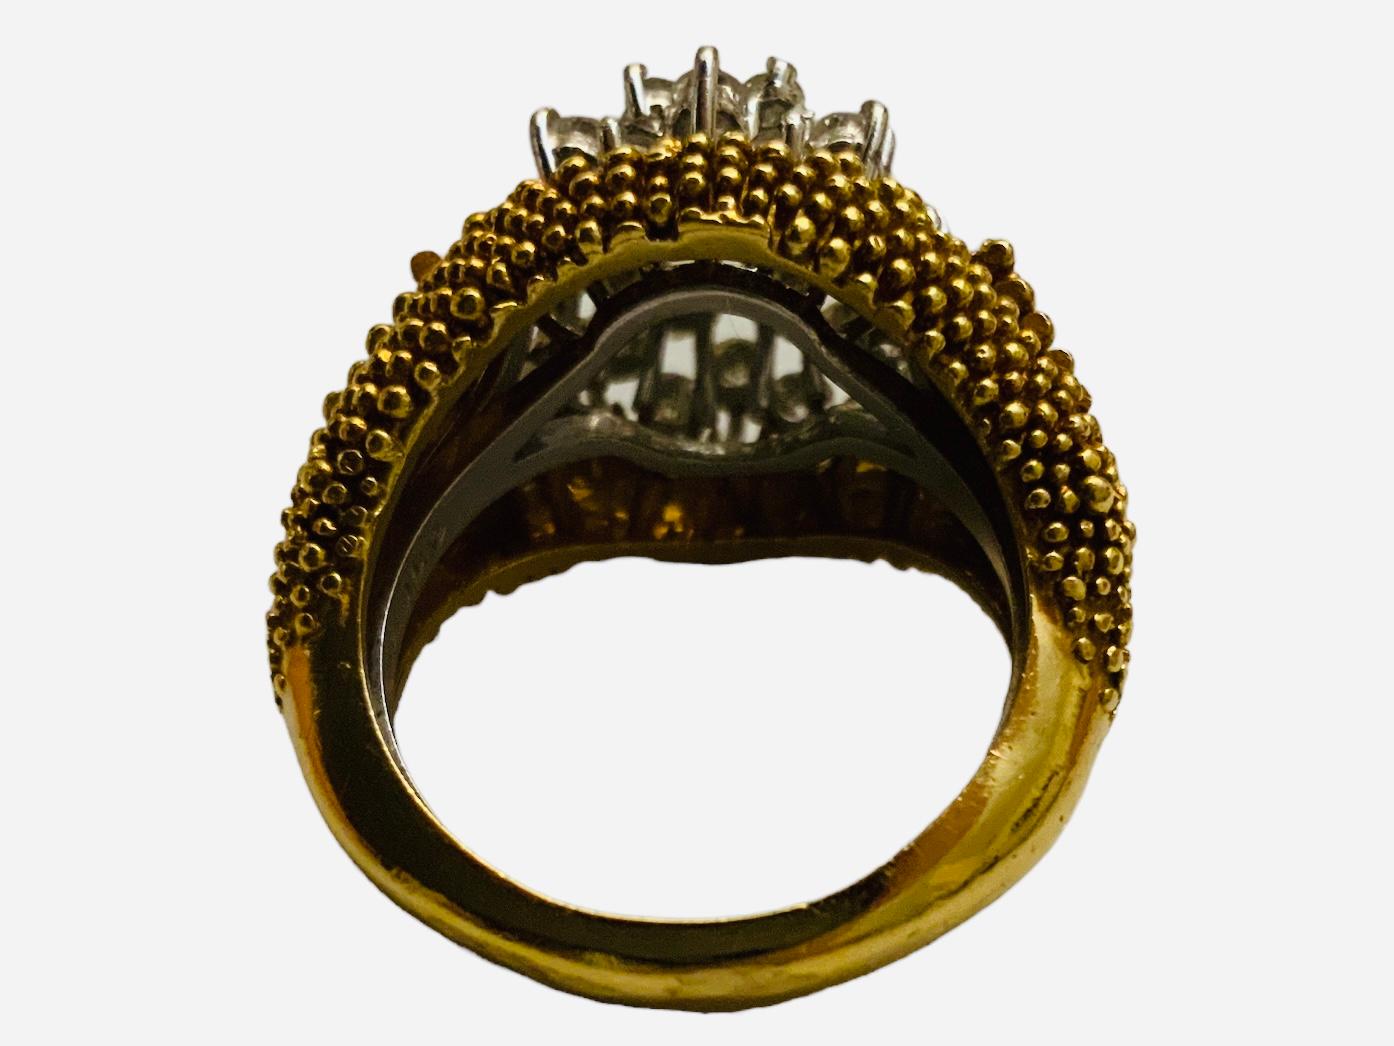 This is a 14K and 18K Gold and diamonds ring. It depicts  a 18K yellow gold wide ring (weighing 6.8dwt  ) made of a cluster of beads that serves as an insert to an 14K white gold ballerina diamonds ring (weighing 2.5dwt ). This white gold ring